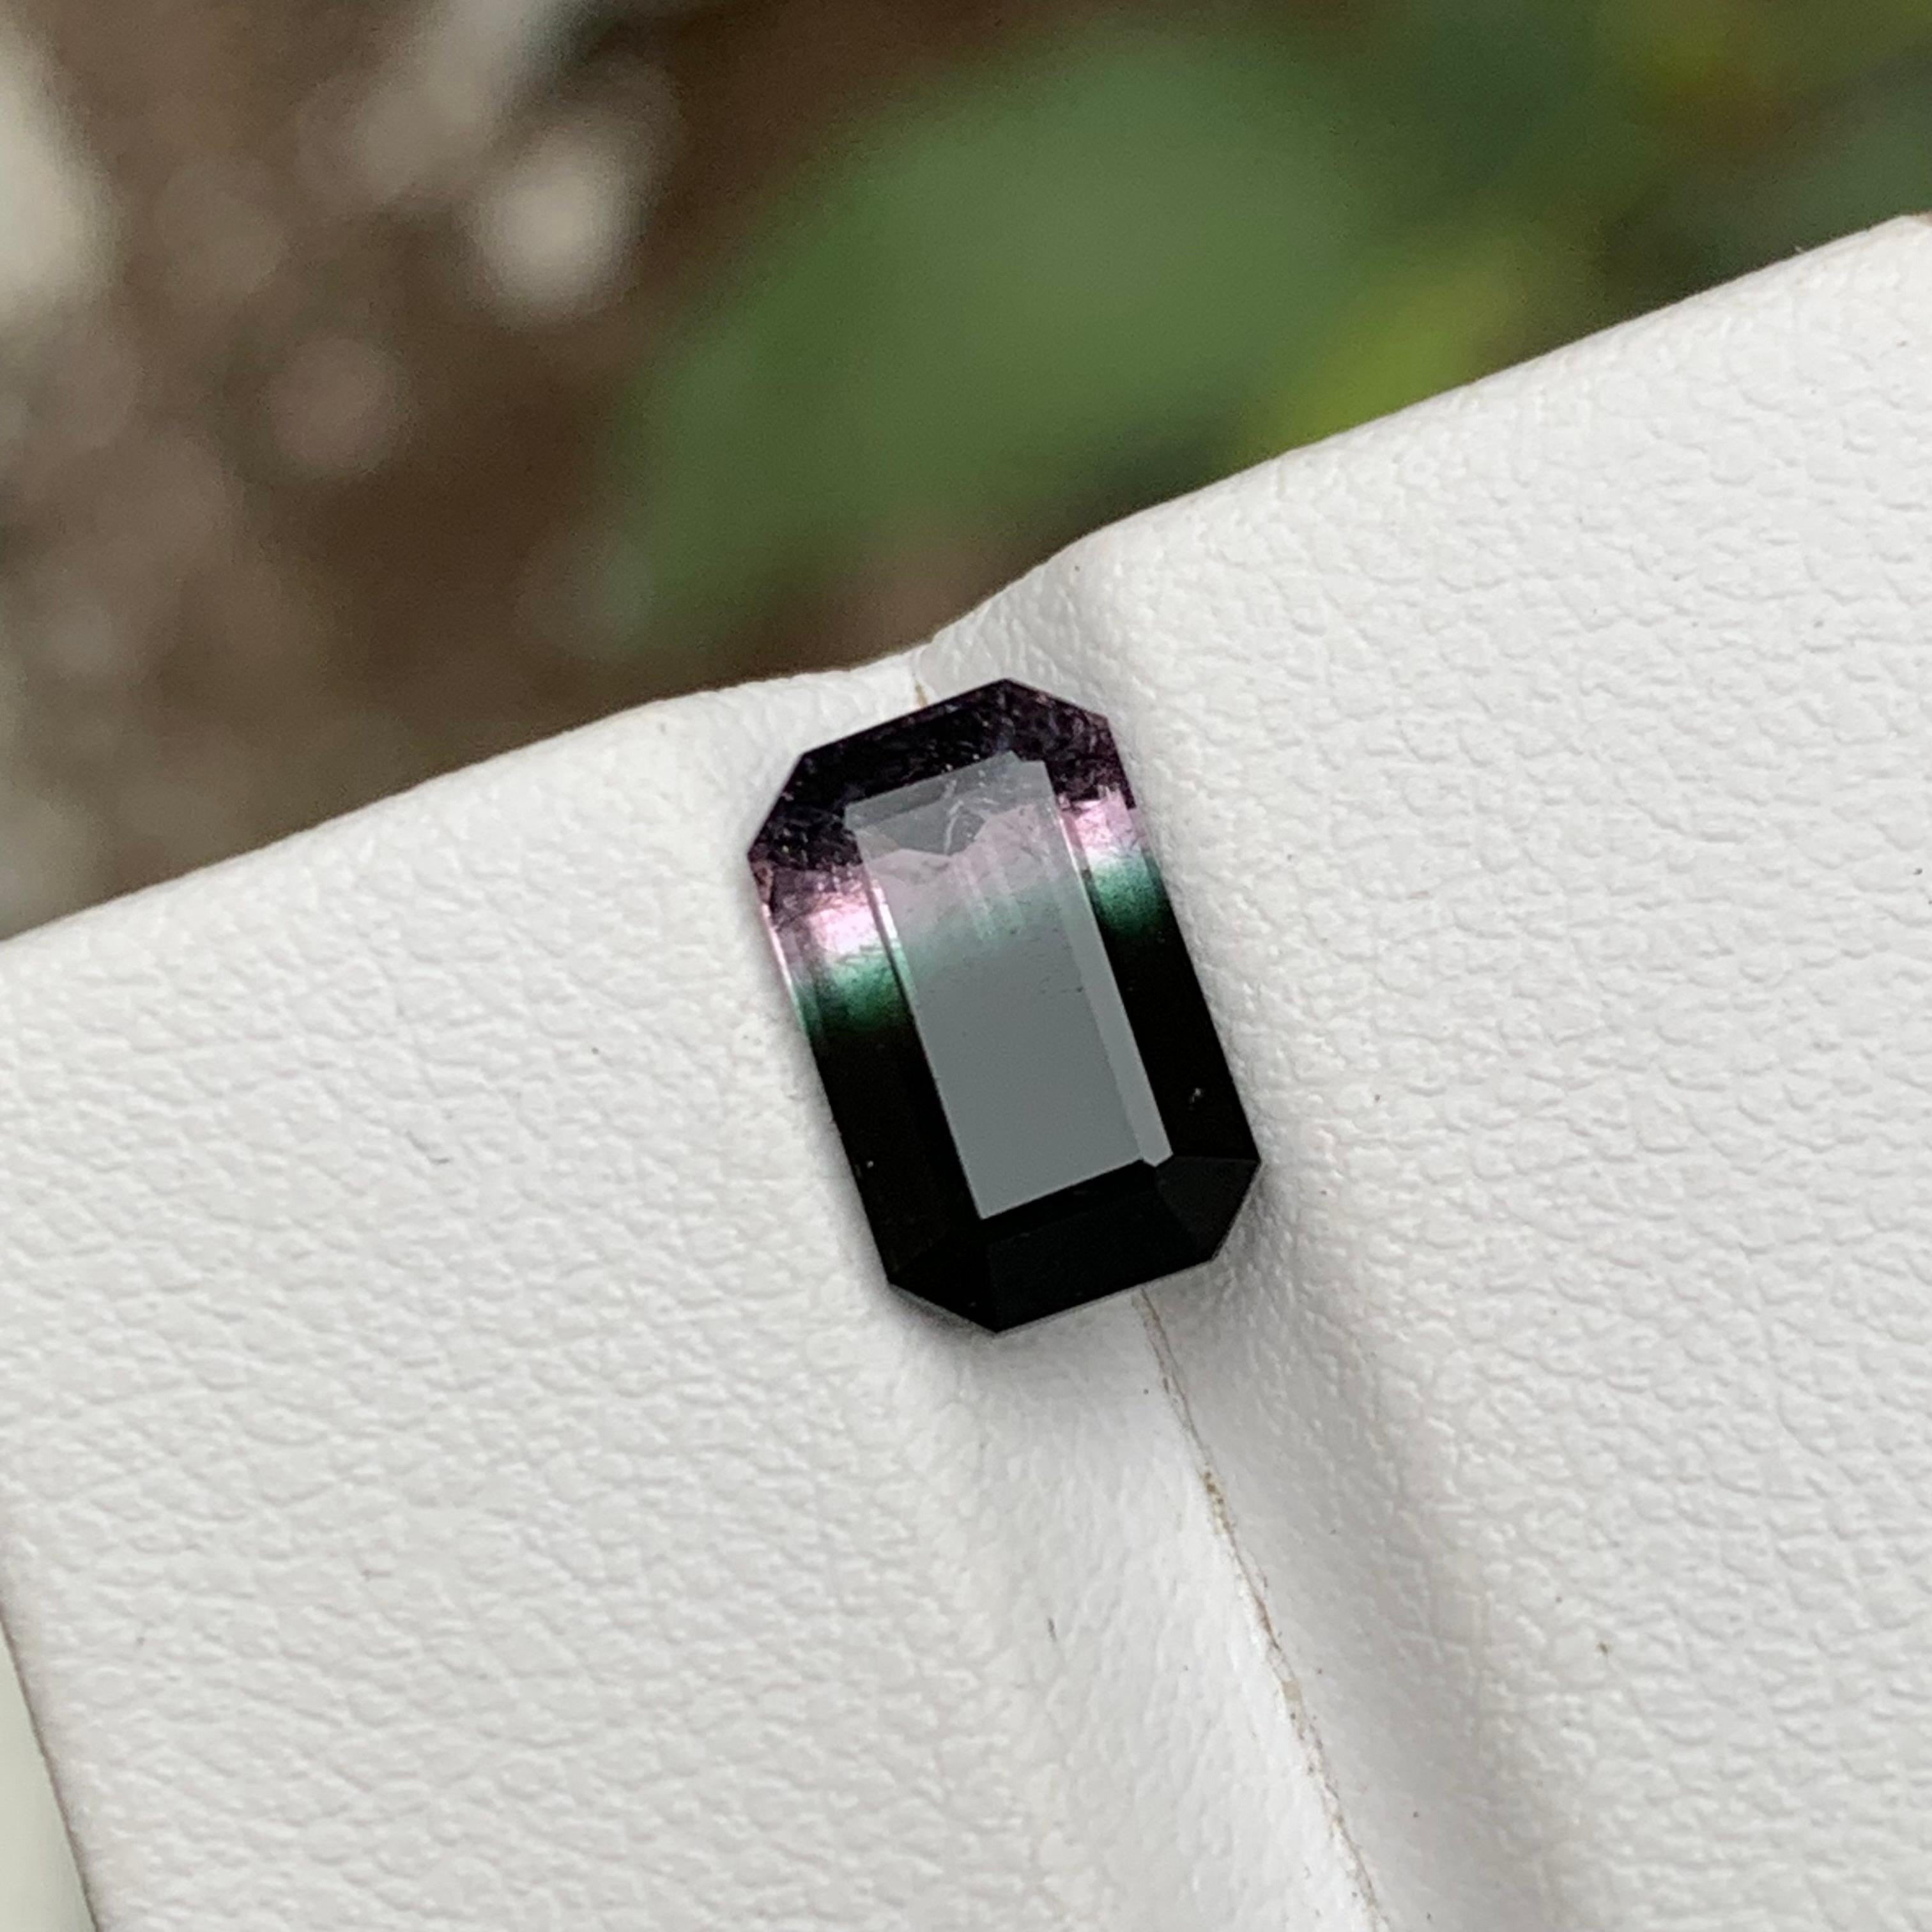 GEMSTONE TYPE: Tourmaline
PIECE(S): 1
WEIGHT: 2.10 Carats
SHAPE: Emerald Cut
SIZE (MM): 9.67 x 6.04 x 4.07
COLOR: Tricolor
CLARITY: Slightly Included 
TREATMENT: None
ORIGIN: Afghanistan
CERTIFICATE: On demand

Extraordinary 2.10 Carats Black,